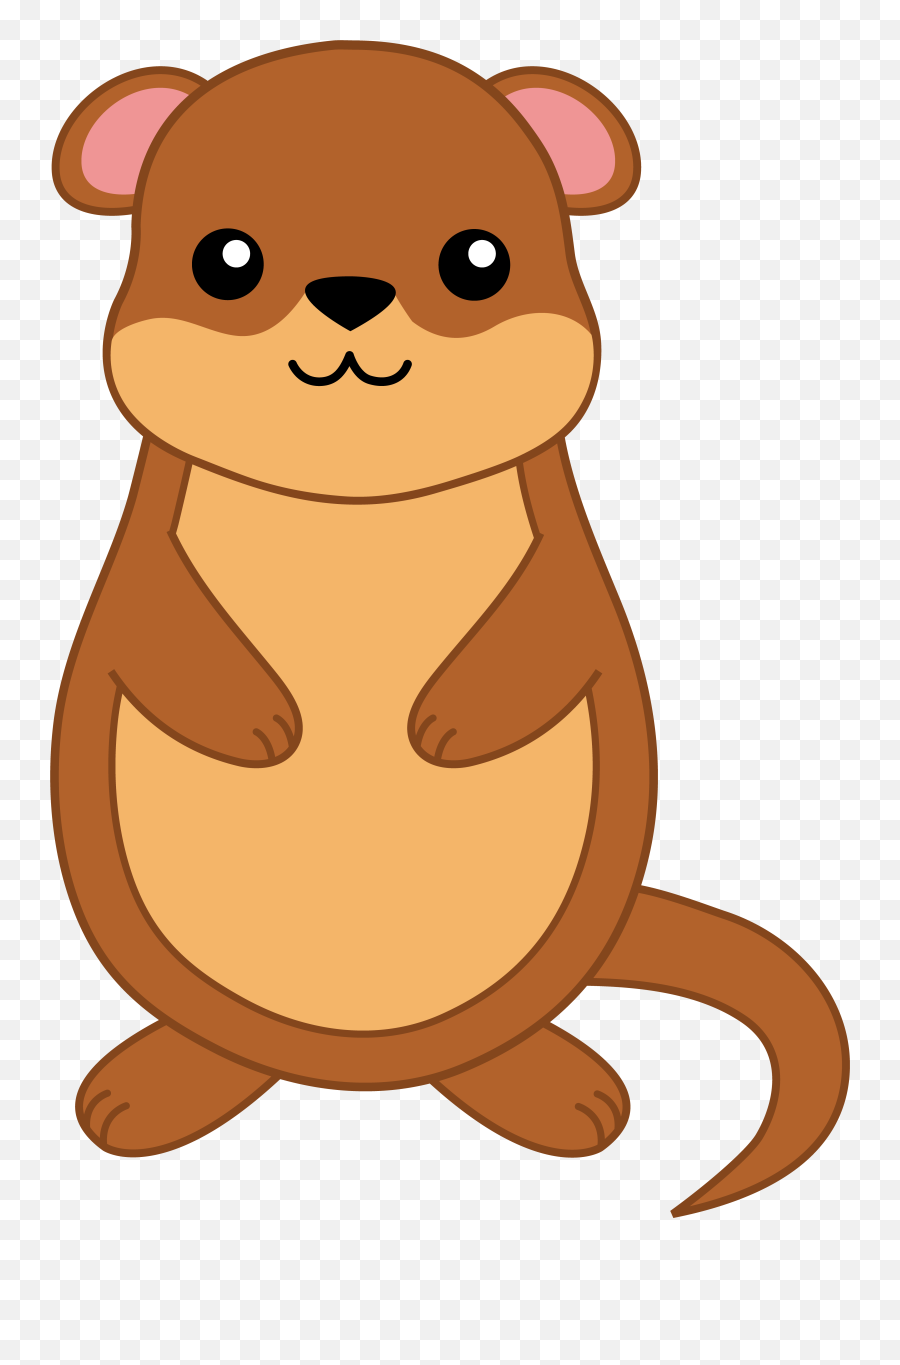 Squirrel Images Clipart Free Download Clip Art Free Clip - Groundhog Clipart Emoji,Squirrel Clipart